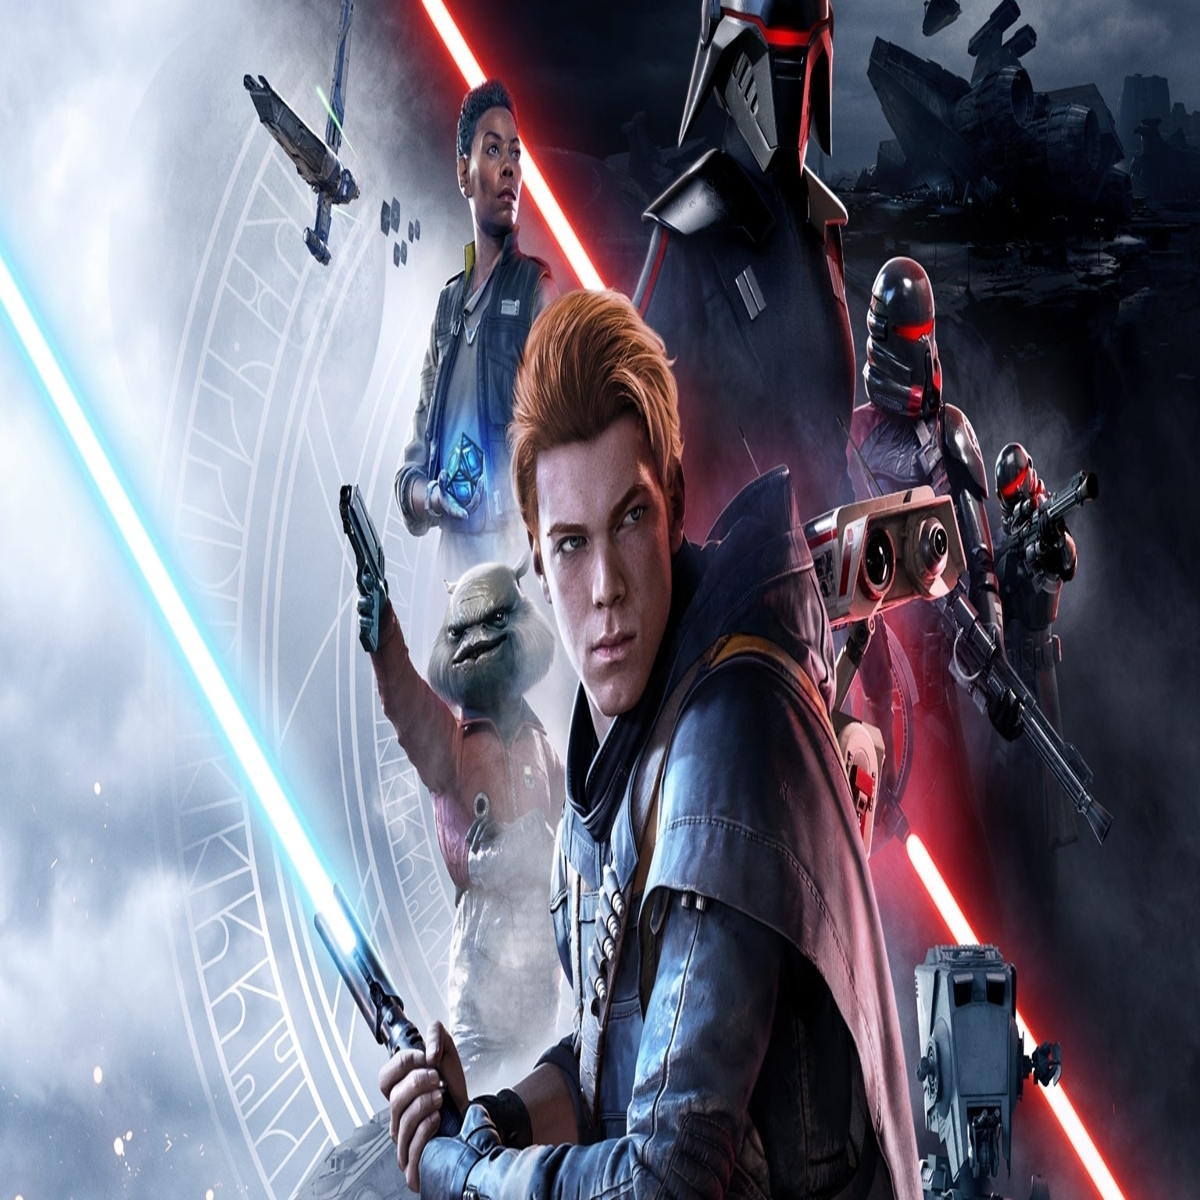 Star Wars Jedi: Fallen Order review - solid combat mired in